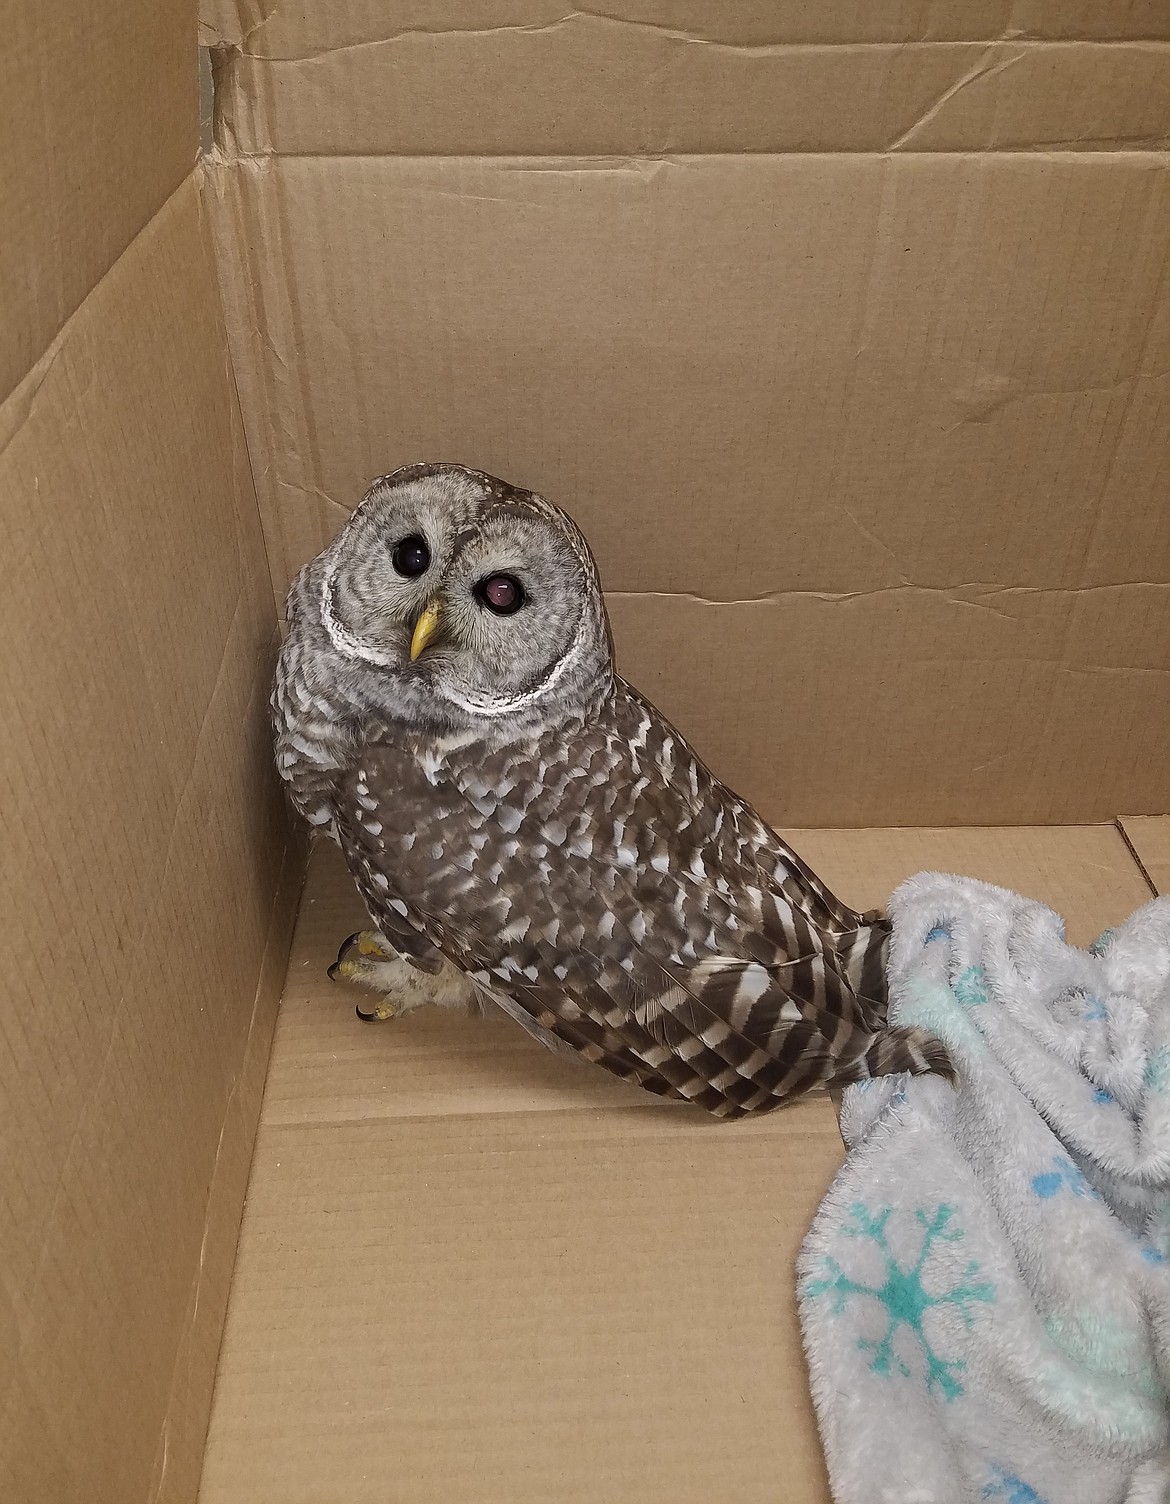 This young barred owl collided with Post Falls resident Laura Sable's vehicle on Nov. 13. She rescued it from the side of the road and got it to law enforcement and then Birds of Prey Northwest, where it spent about a month healing in the North Idaho nonprofit's facility. It was released back into the wild Friday morning. It is seen here about two hours after sustaining the injuries. (Courtesy photo)